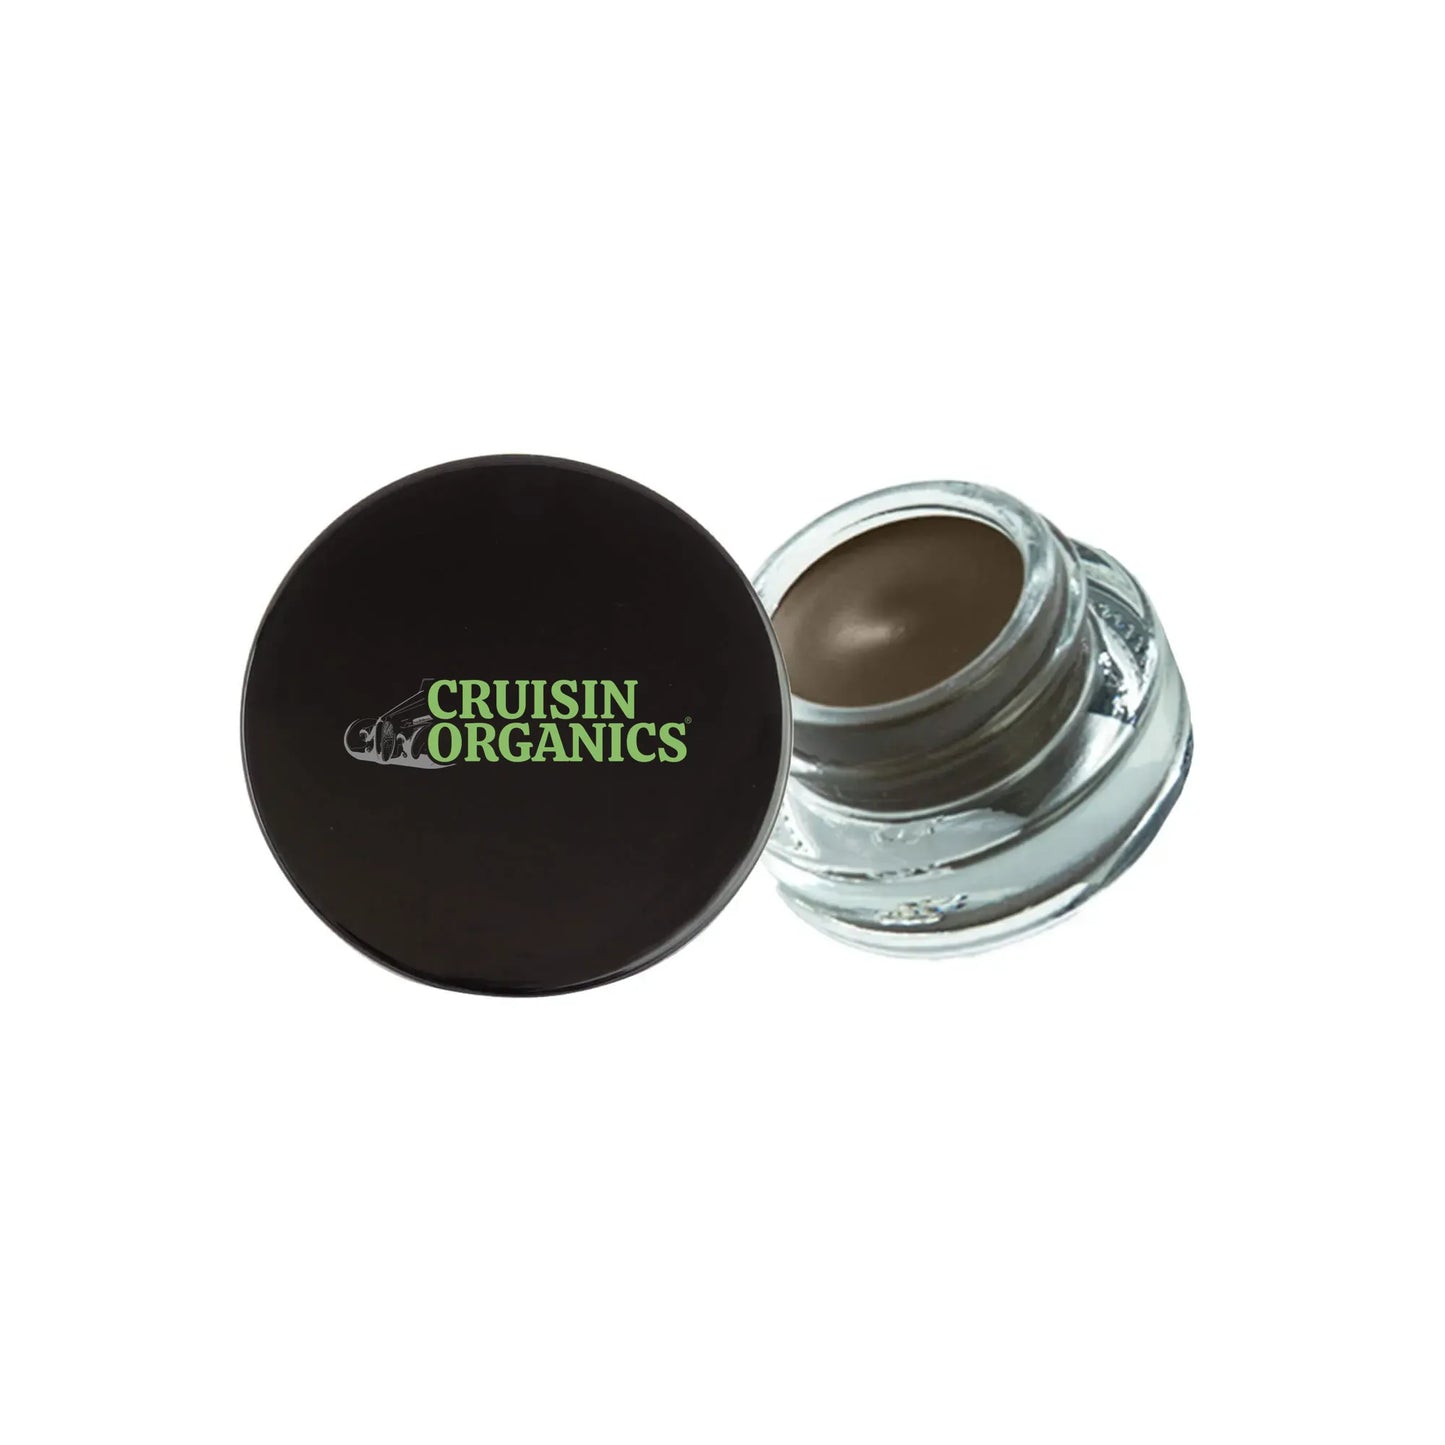 Enhance your brow game with Choco-Latte Brow Pomade from Cruisin Organics. This vegan and cruelty-free formula fills sparse brows and tames and shapes thicker ones. Achieve flawlessly defined brows without parabens or added fragrance.